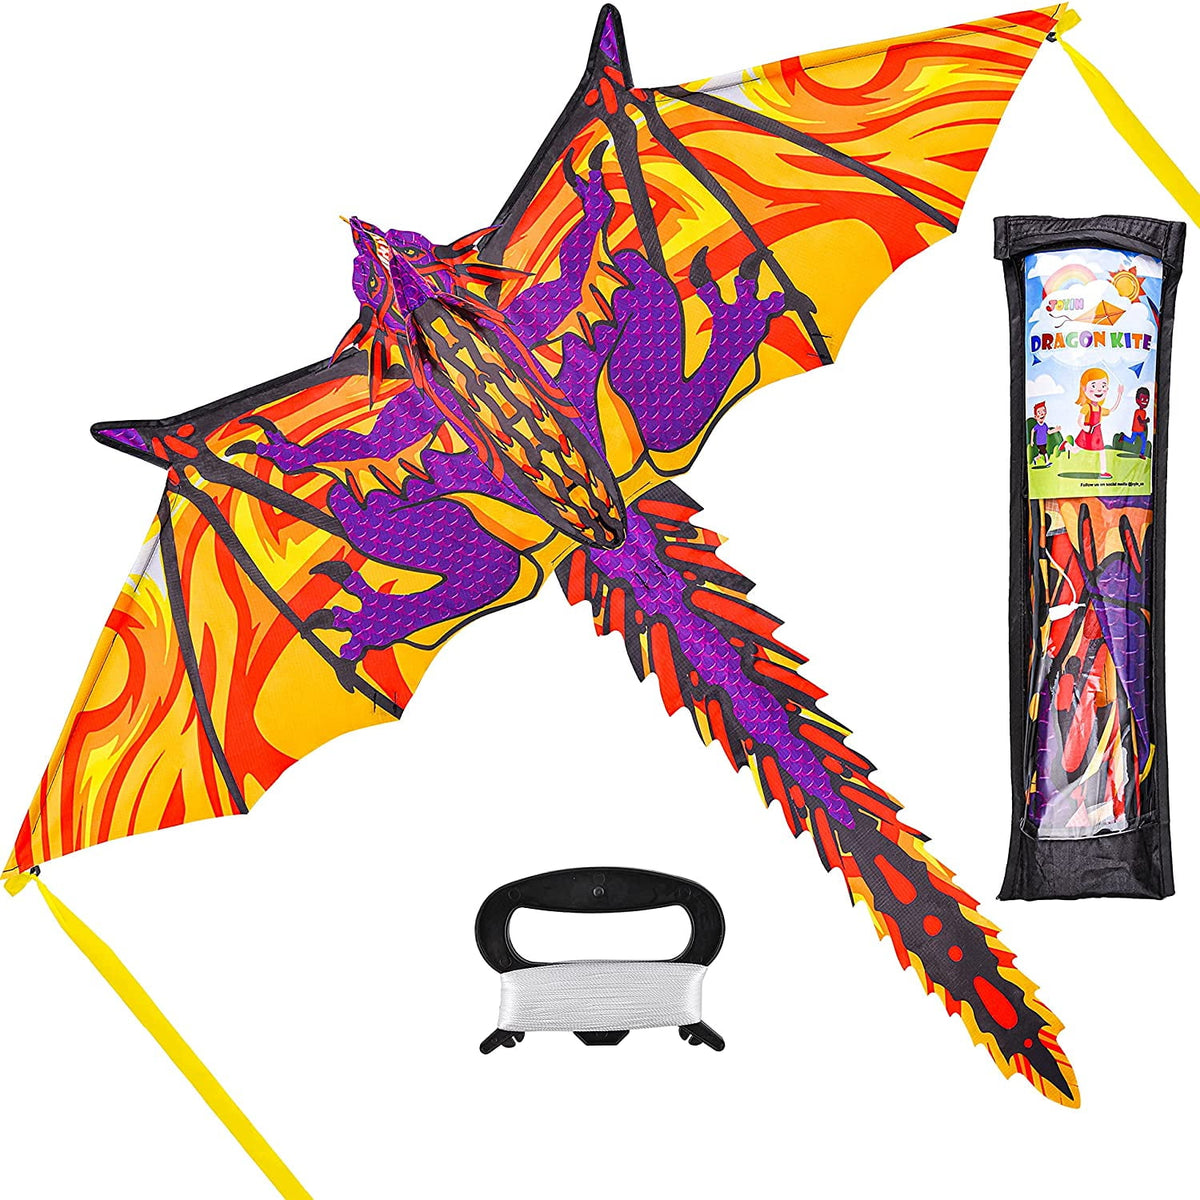 Giant 3D Dragon Kite by Joyin- 262ft of String Included!